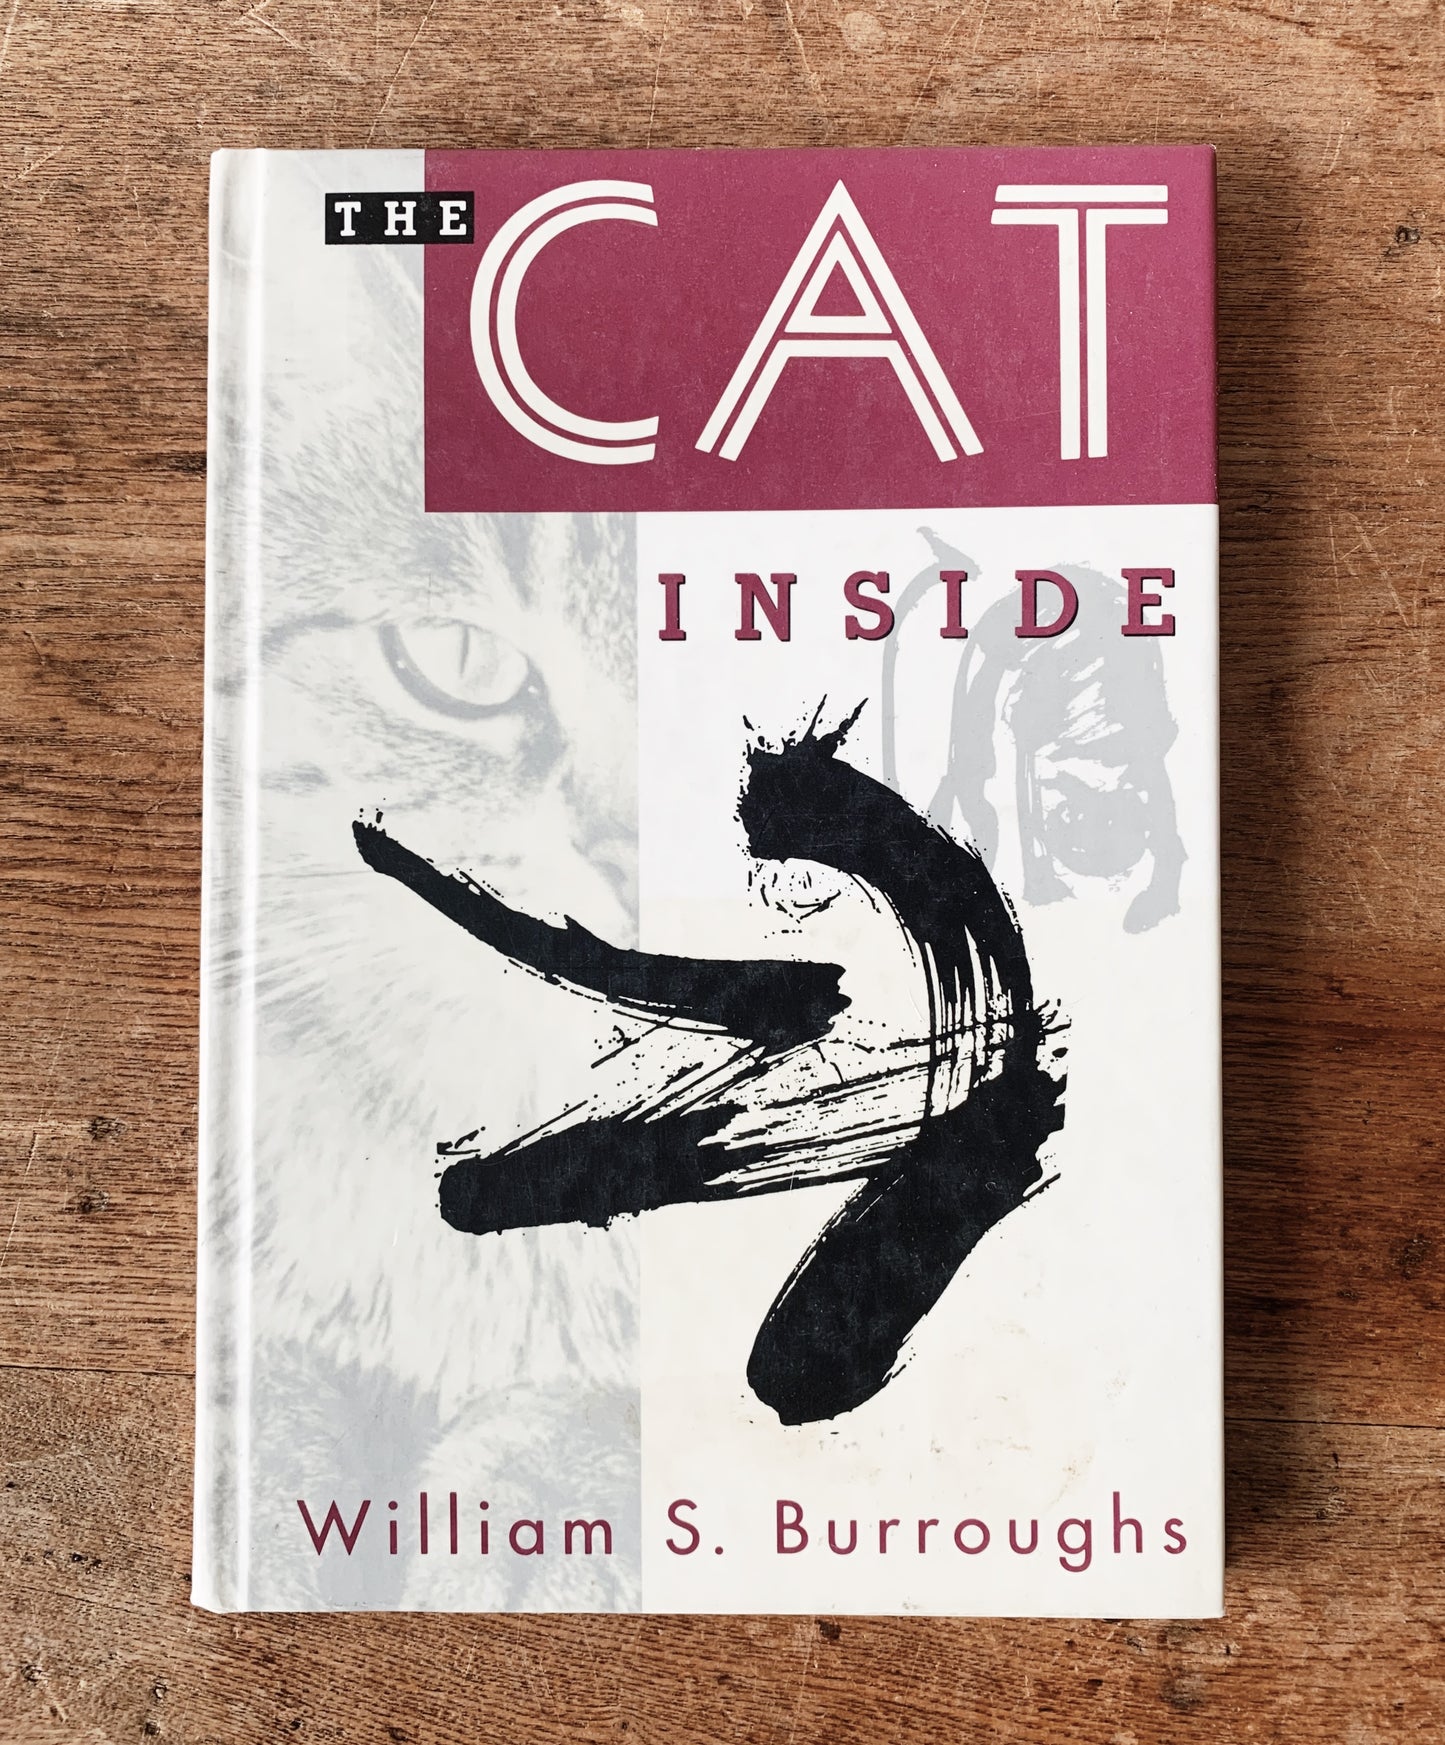 The Cat Inside by William Burroughs